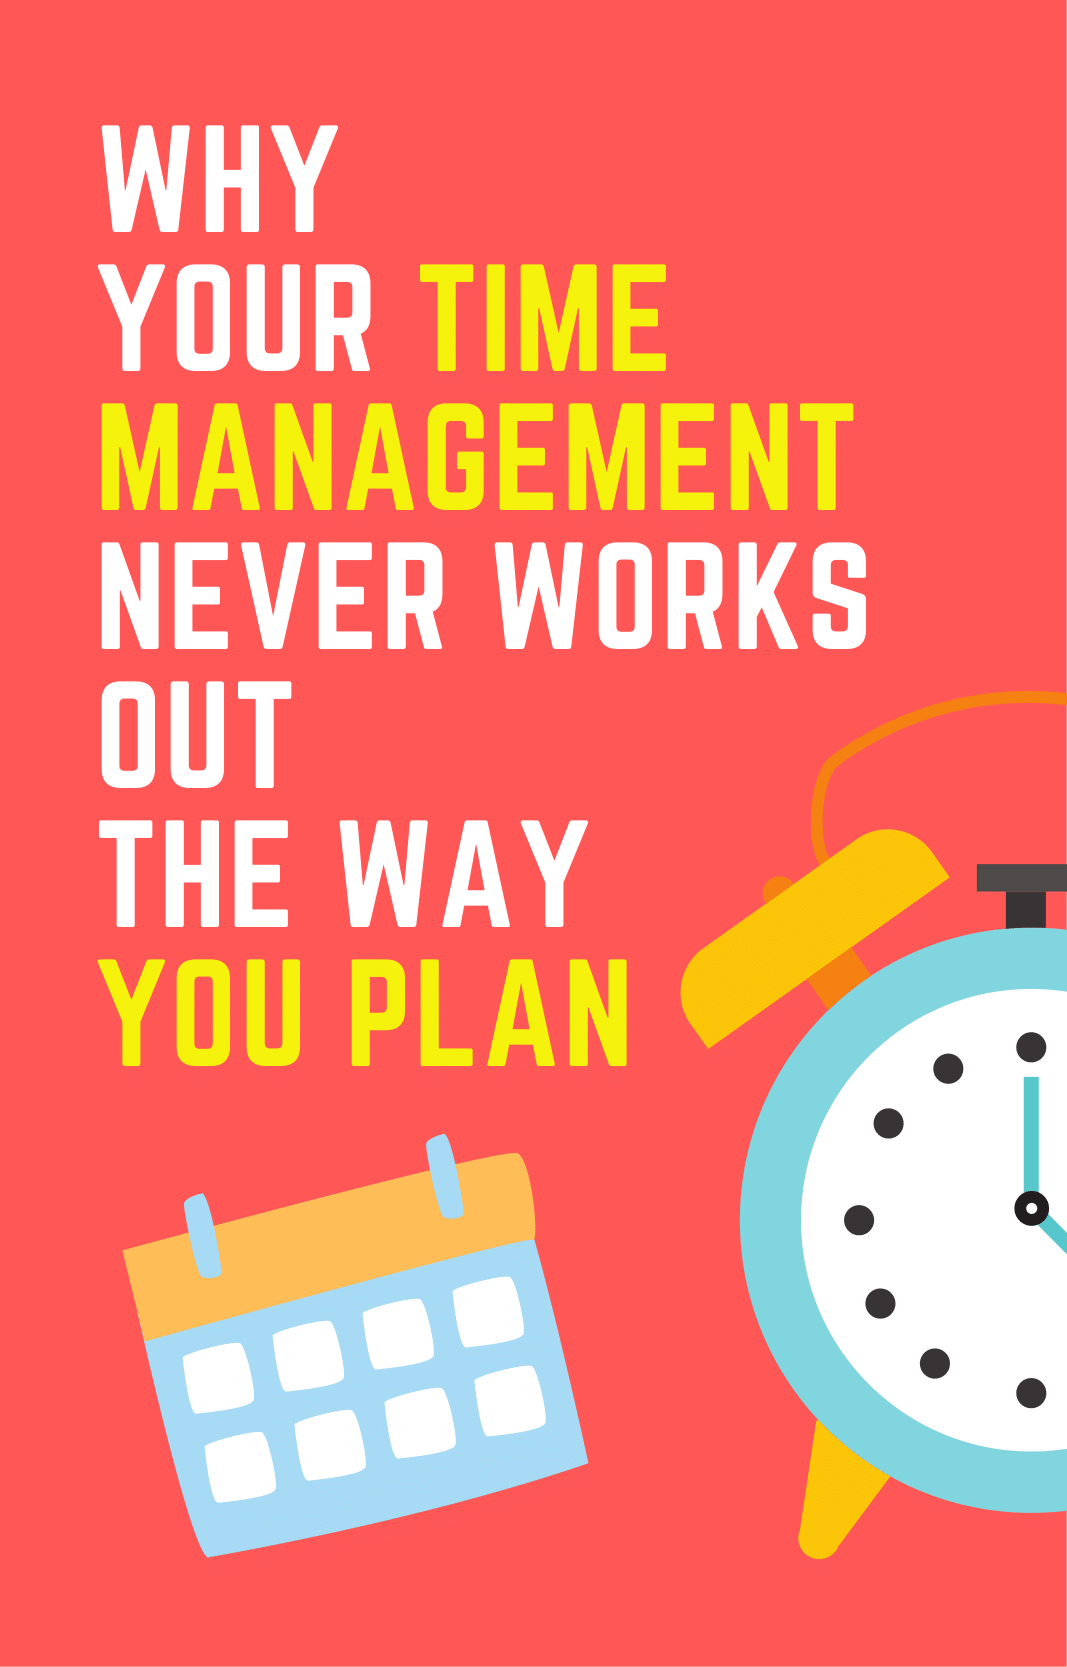 time_management_you_plan